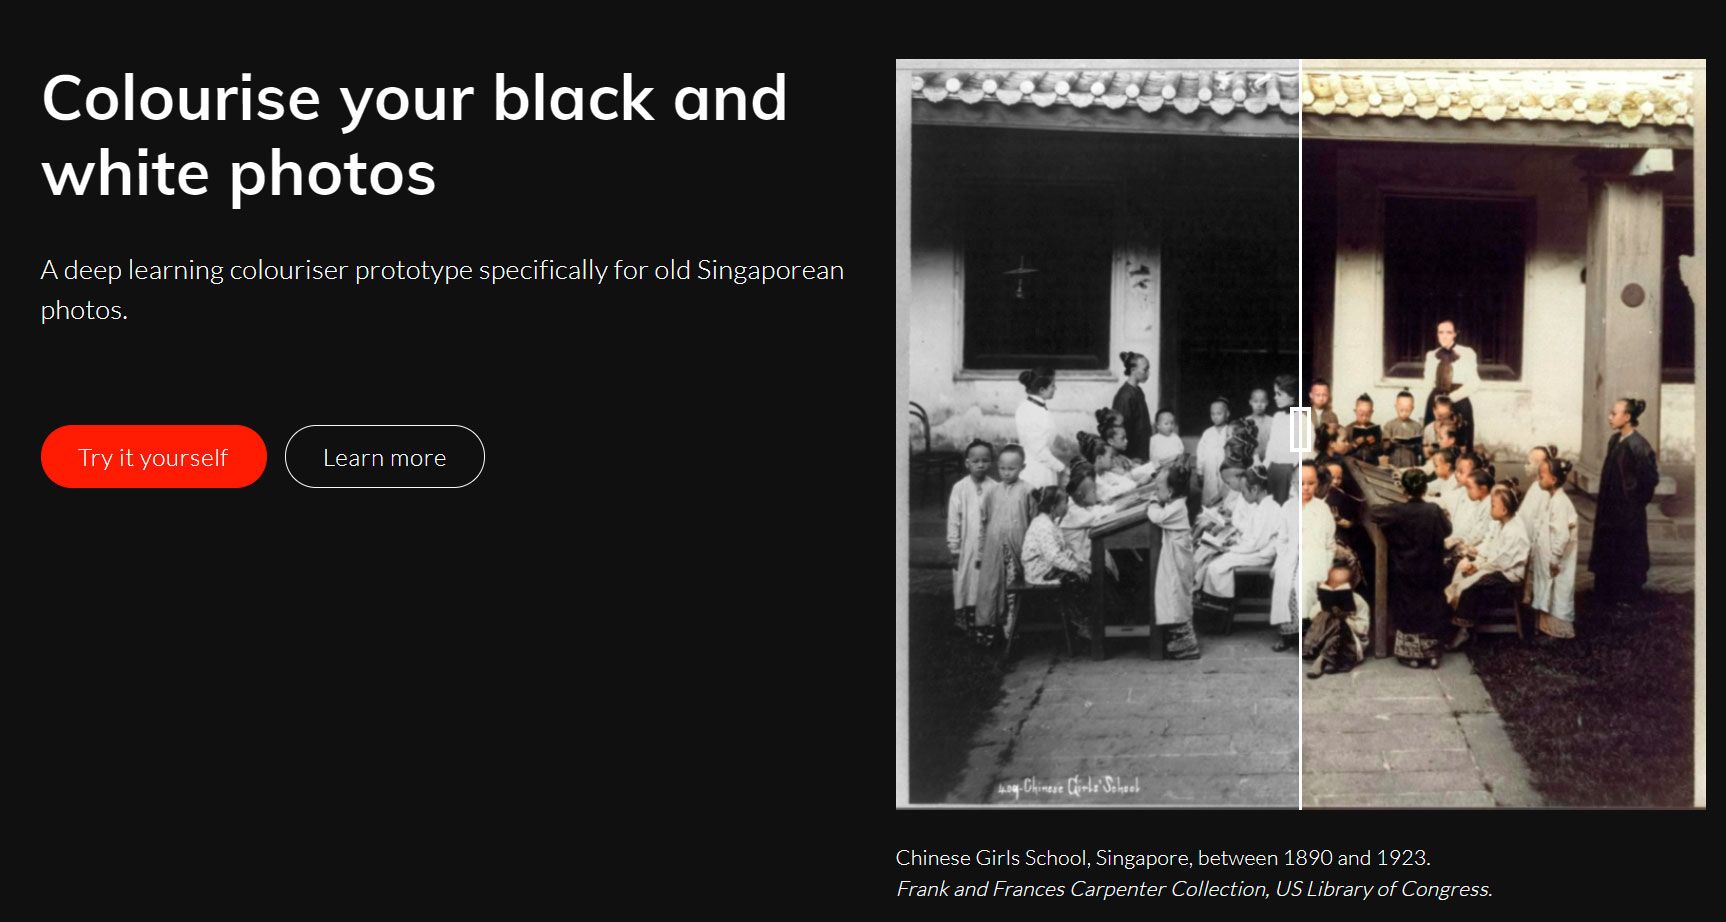  colorize black and white photos in colorise.sg..